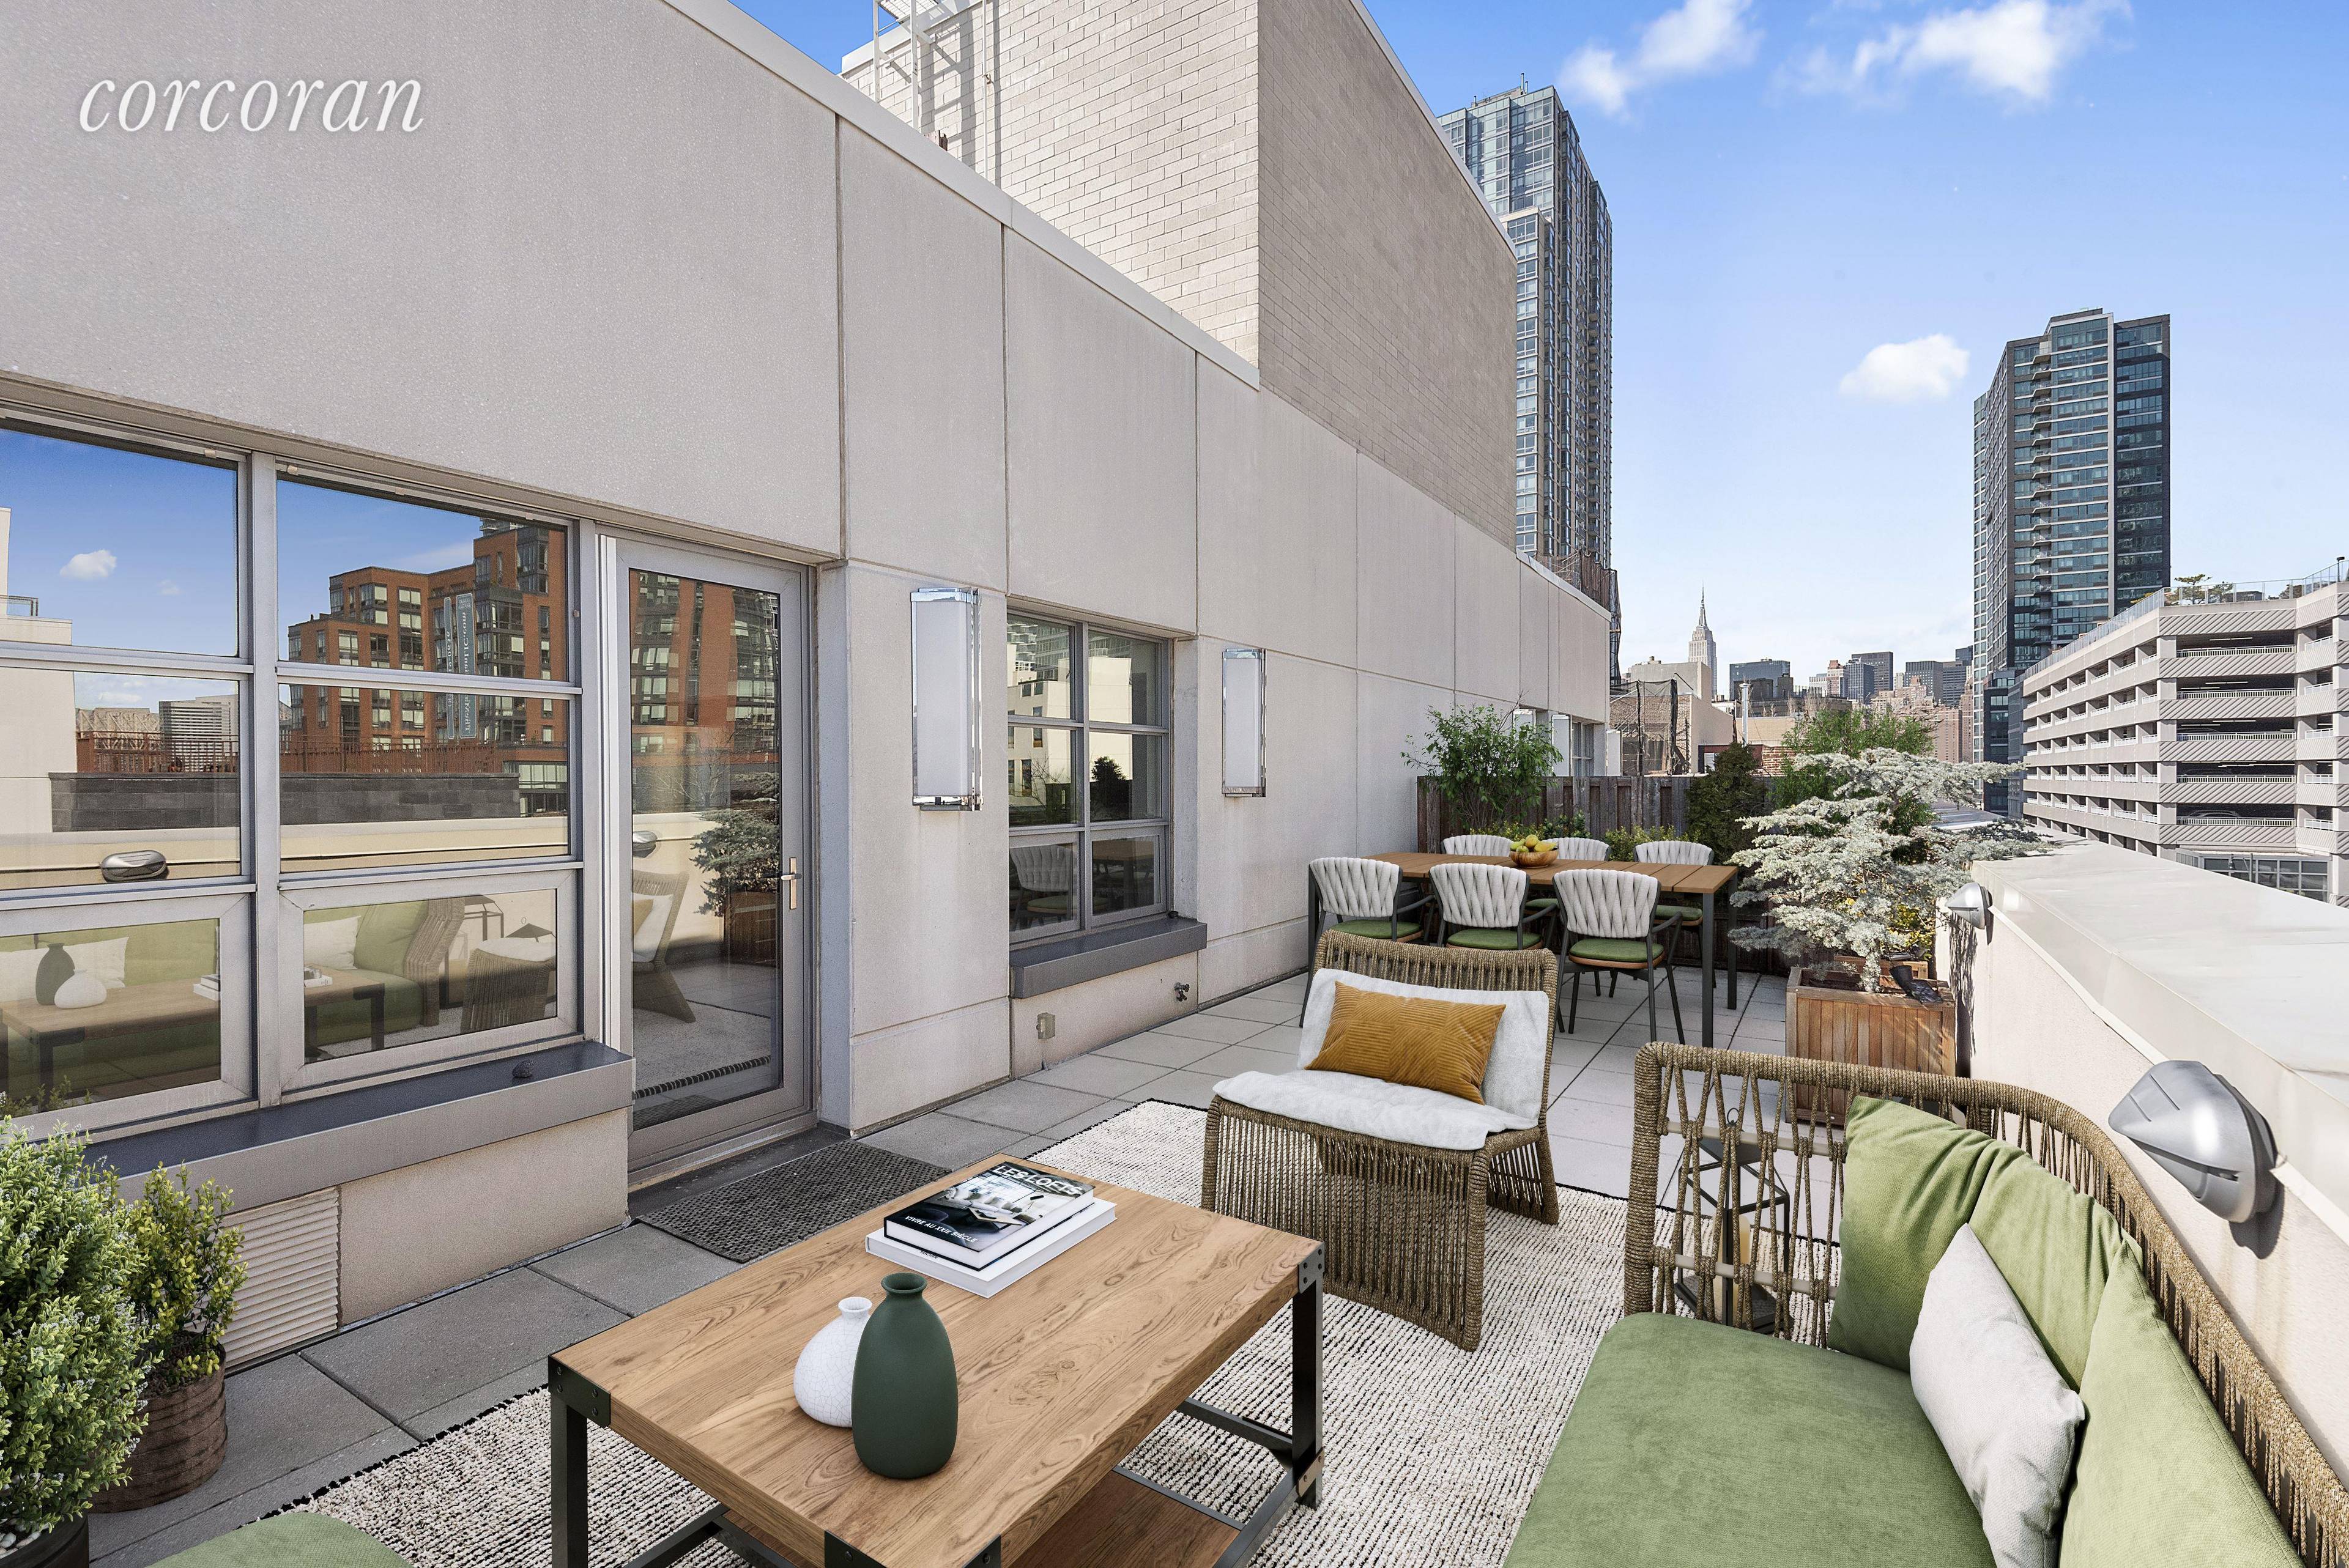 Amazing 2 bedroom 2 bath with incredible 500 sf private deck offering open views on the Ed Koch Bridge, Empire State Building and long Island City skyline.